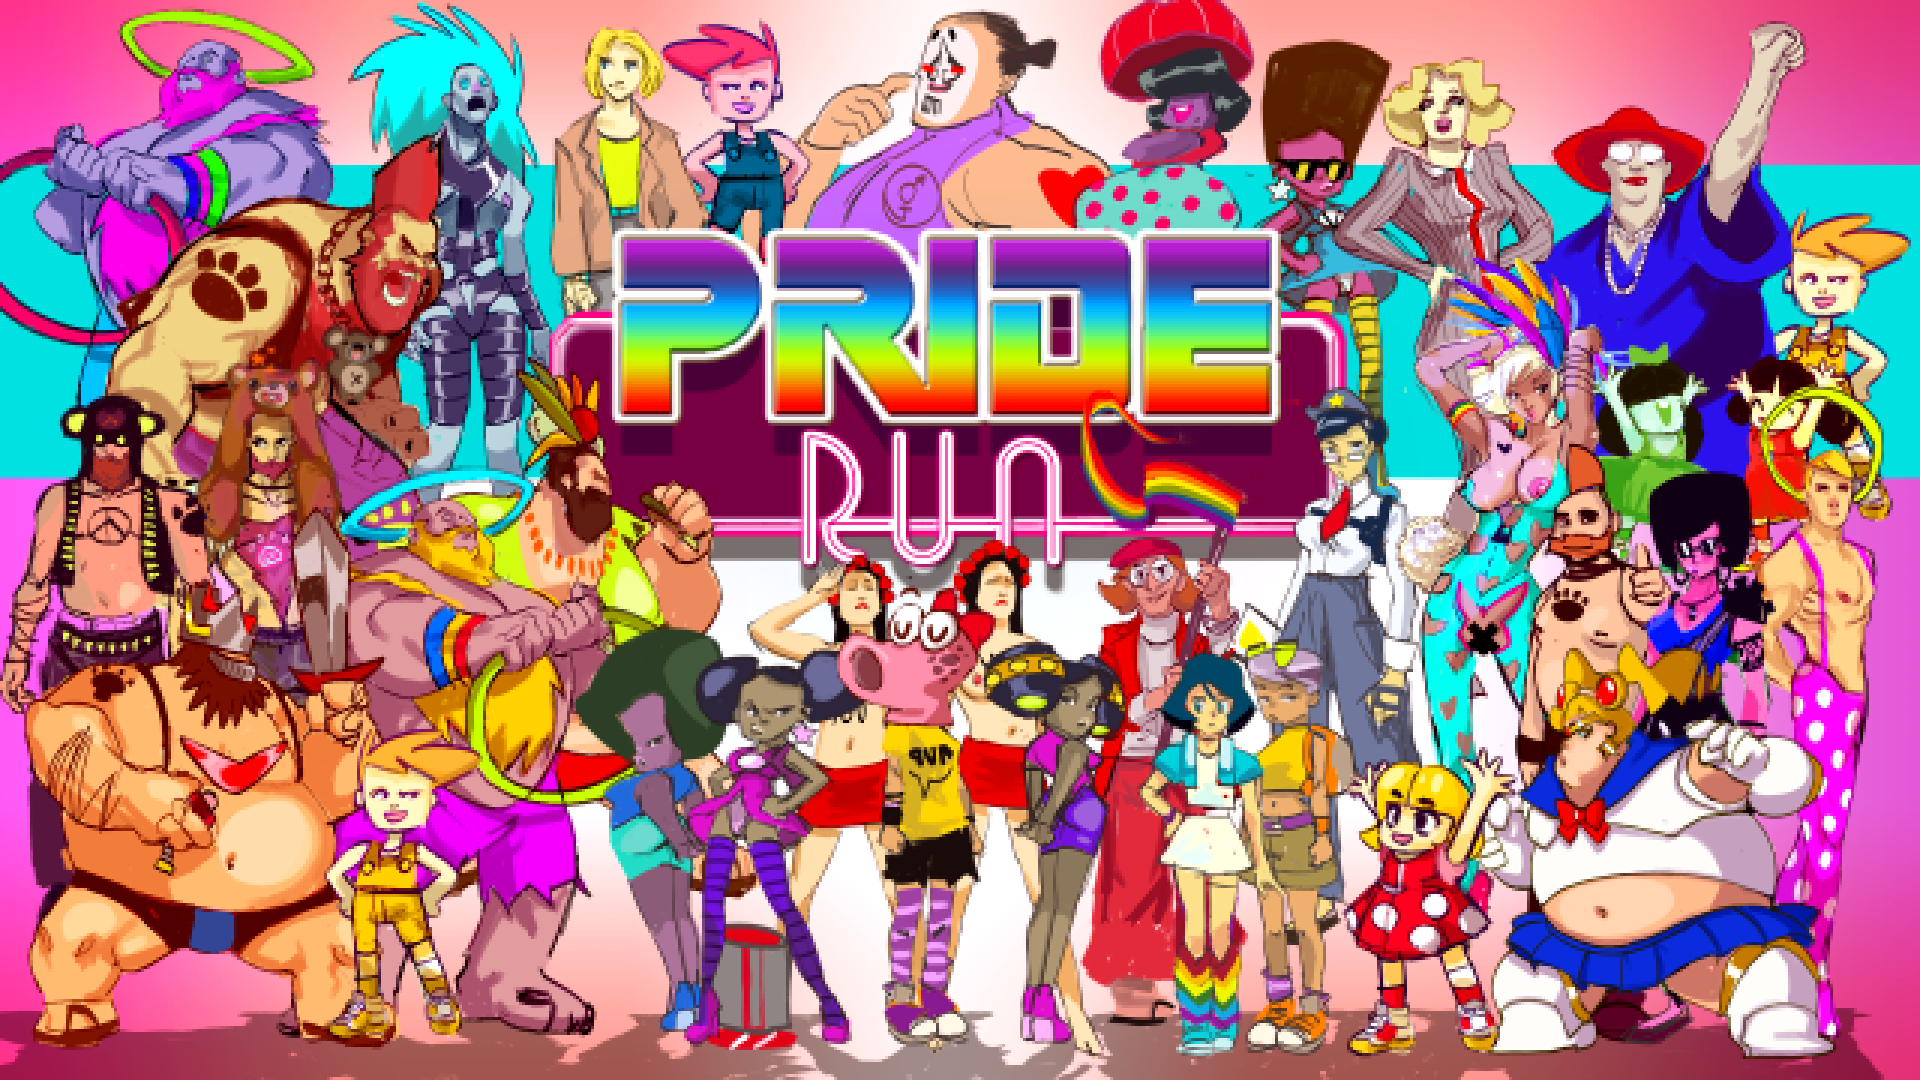 upcoming LGBT indie games you should check out